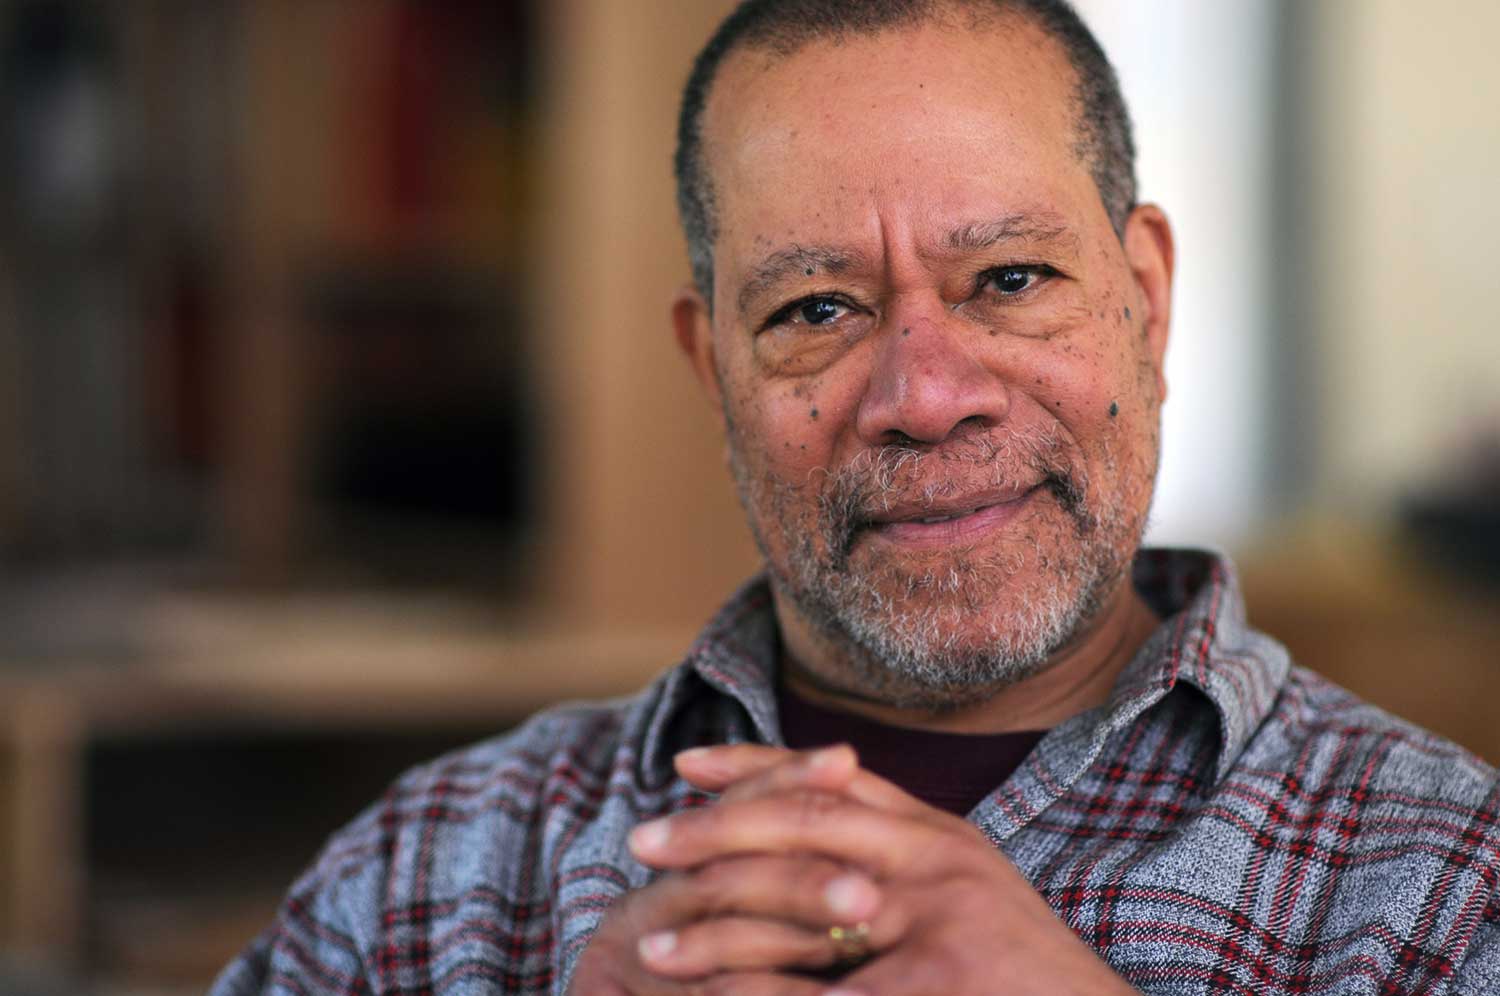 Jerry Pinkney looks into the camera with his hands folded.